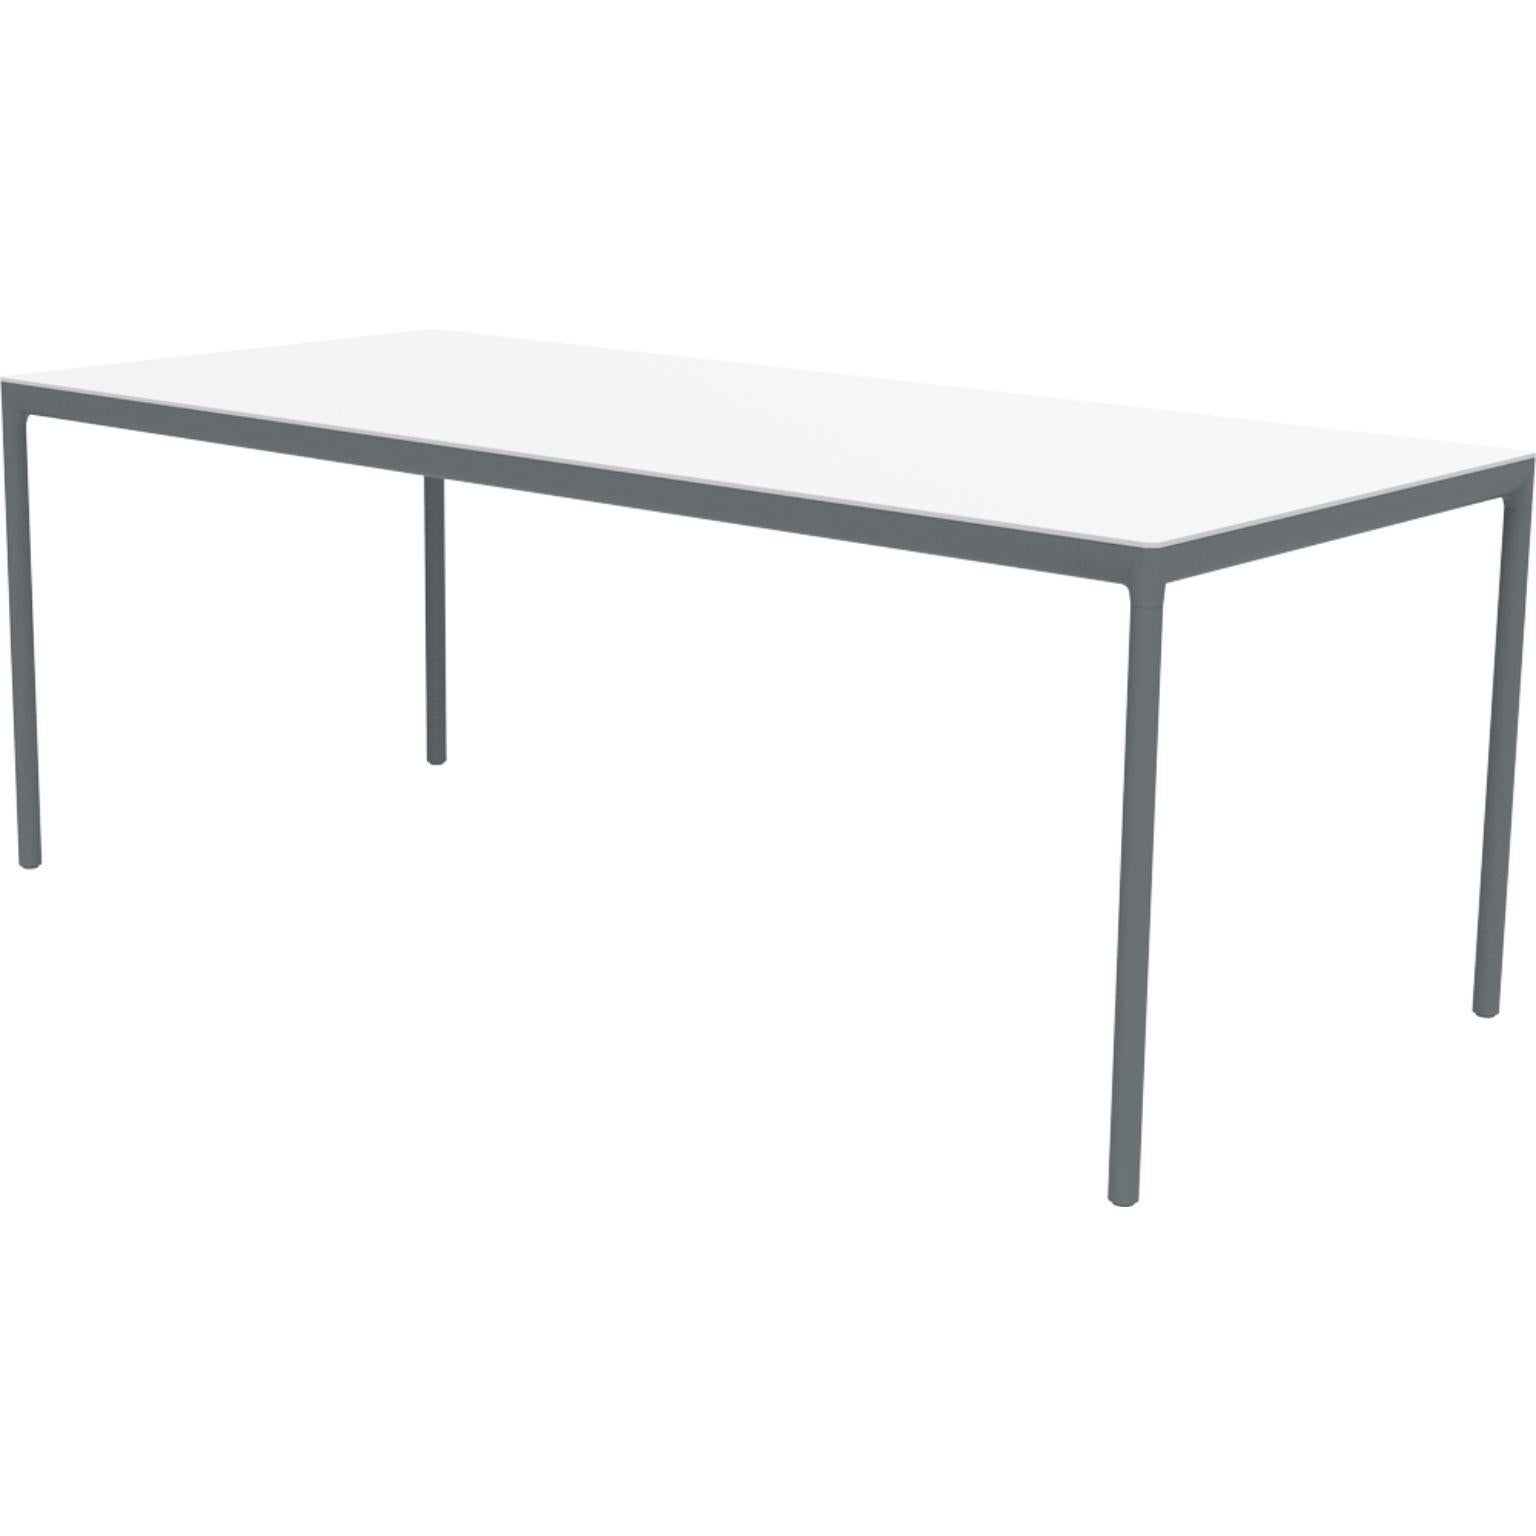 Ribbons grey 200 coffee table by MOWEE
Dimensions: D90 x W200 x H75 cm.
Material: Aluminum and HPL top.
Weight: 25 kg.
Also available in different colors and finishes. (HPL Black Edge or Neolith top). 

An unmistakable collection for its